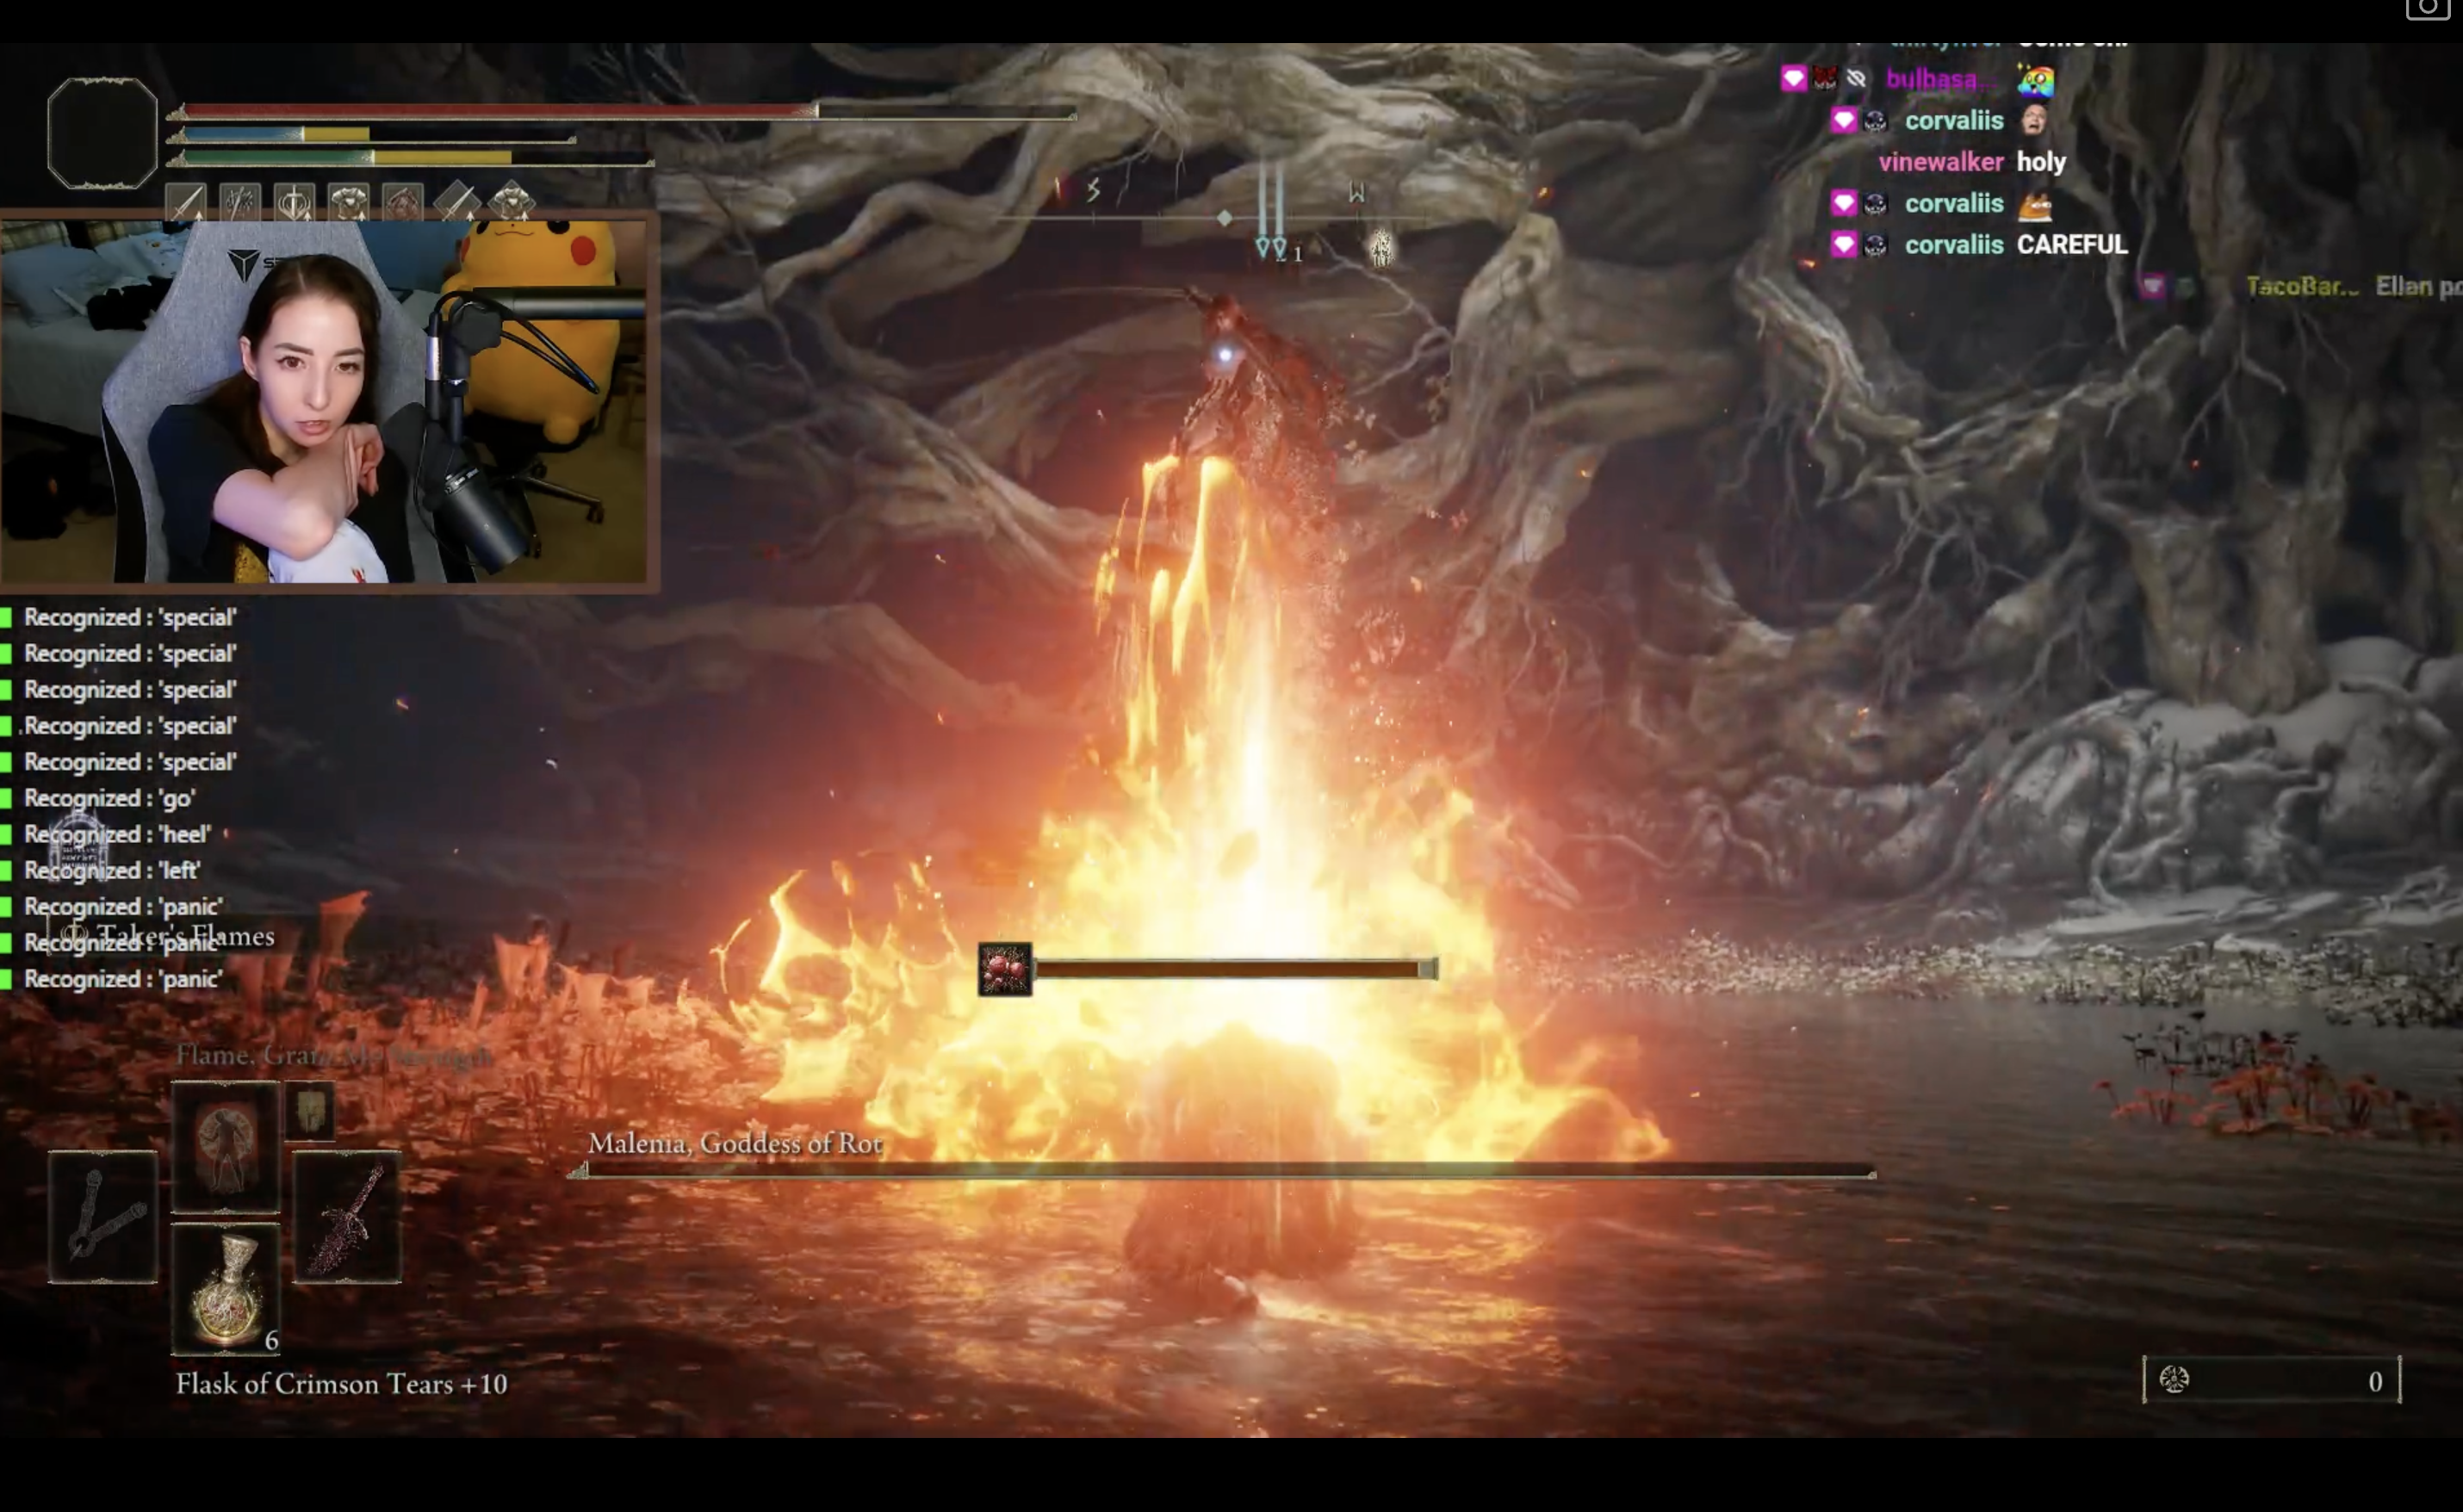 Elden Ring’s Malenia going up in flame after the player character launches an attack at her. A Twitch streamer’s image, speaking into a microphone, is in the upper left.